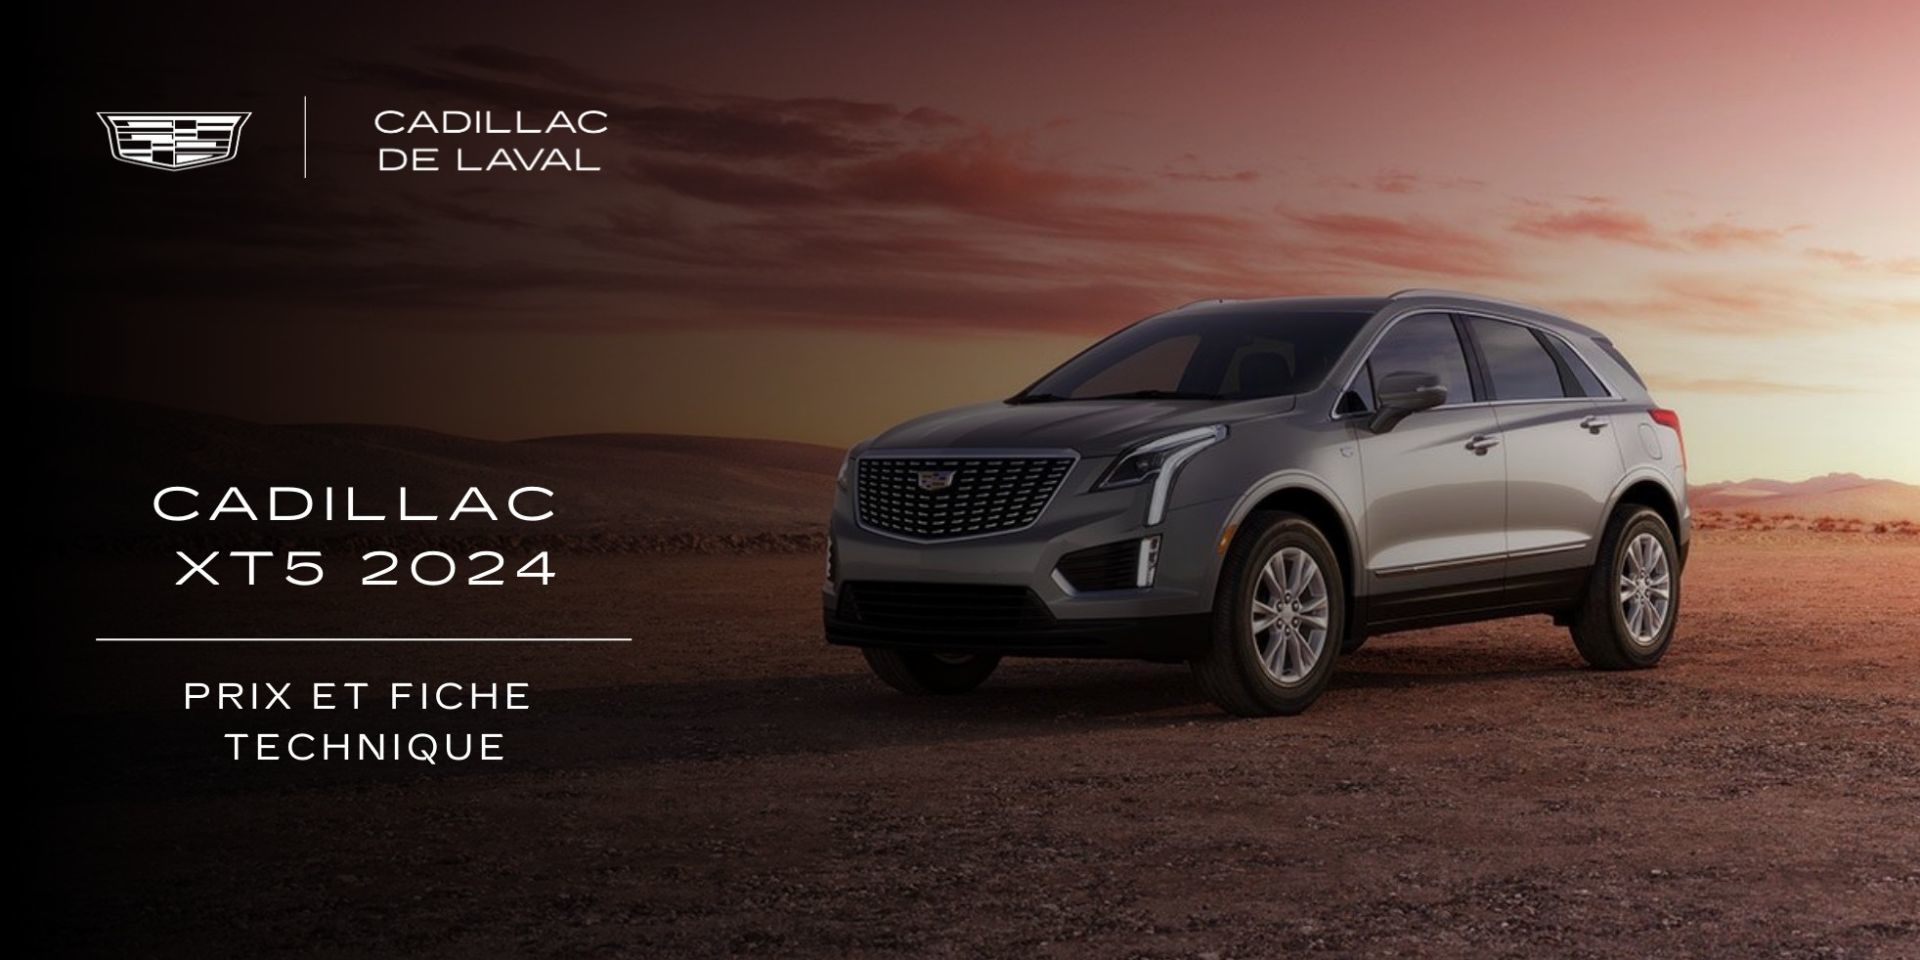 2024 Cadillac XT5 Price and Specs Cadillac Laval